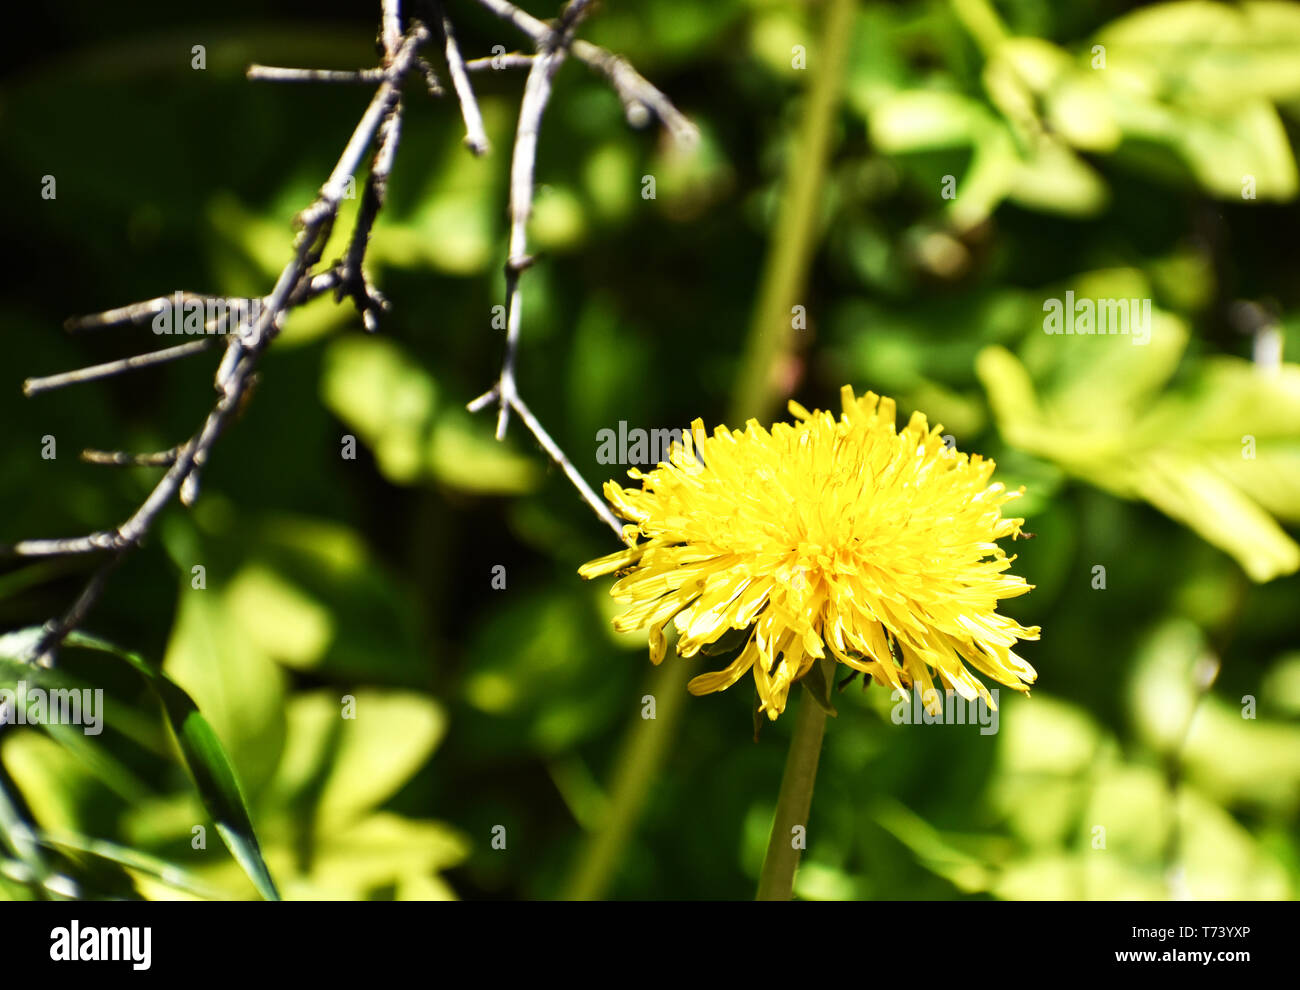 Vivid closeup of Yellow Single Dandelion Flower with Gorgeous Greenery in Background Stock Photo